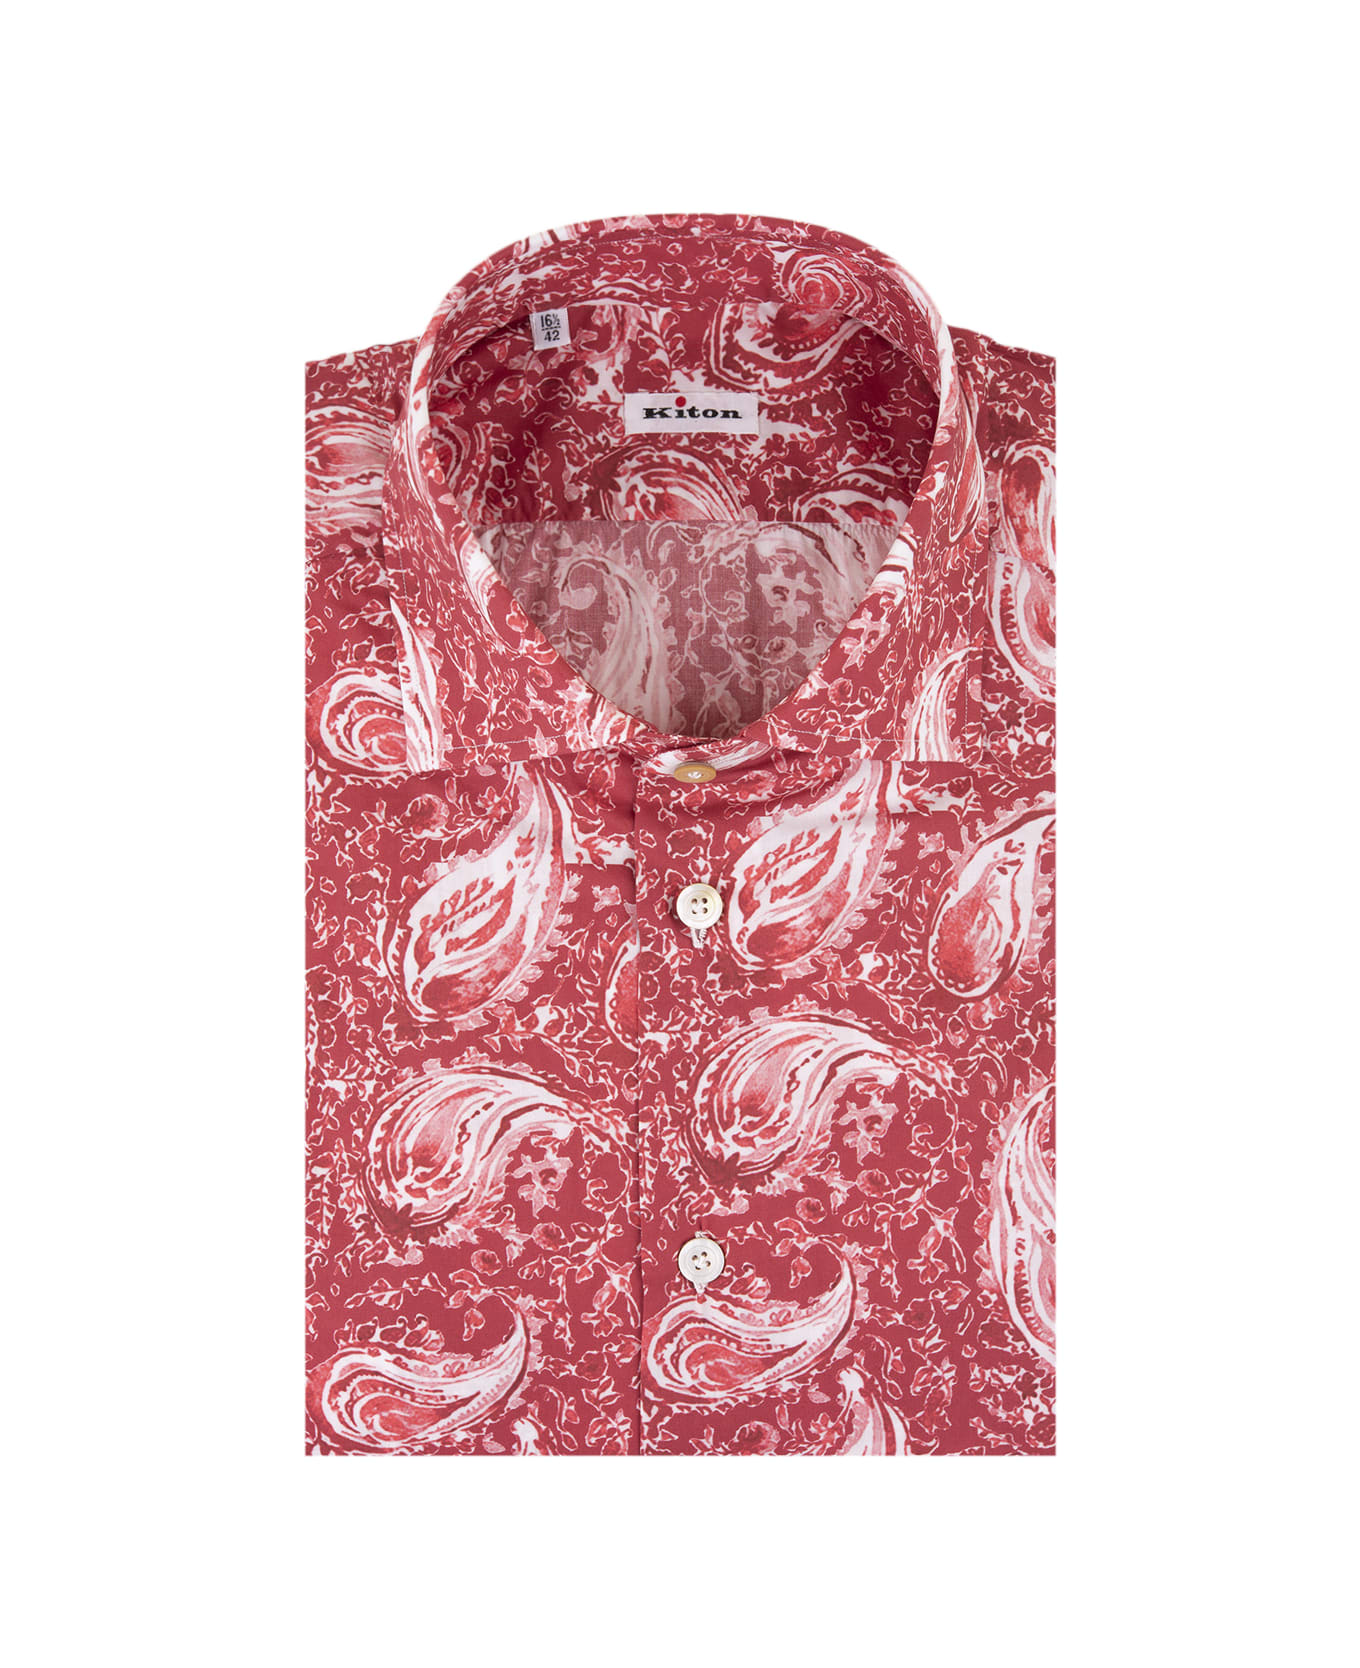 Kiton Red Classic Shirt With Cashmere Print - Red